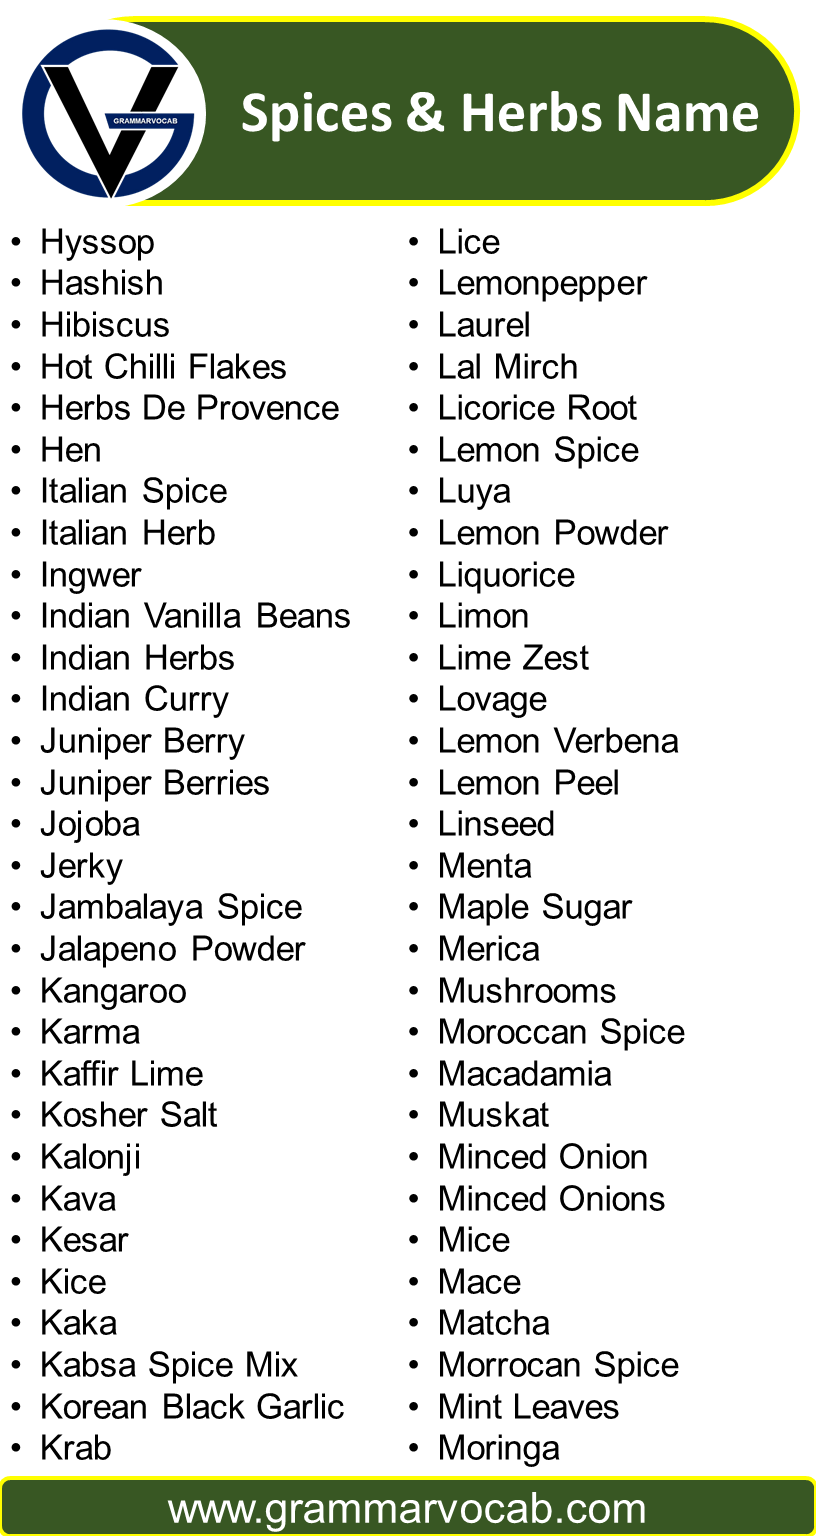 Spices And Herbs List